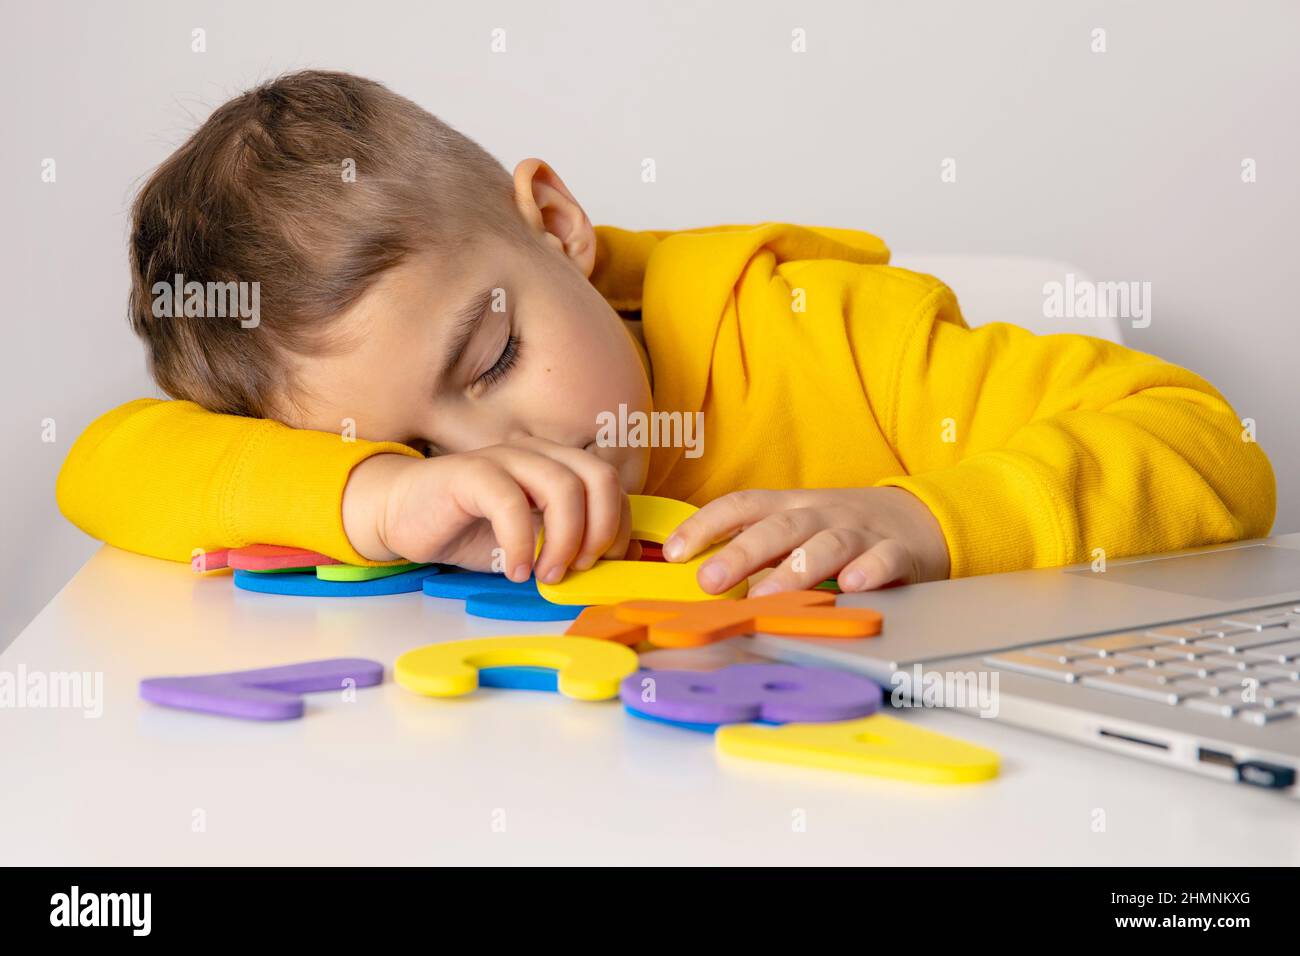 Little boy learning alphabet and numbers online, with laptop at home. Child is sad and tired. Negative emotions, stress, mental problems Stock Photo